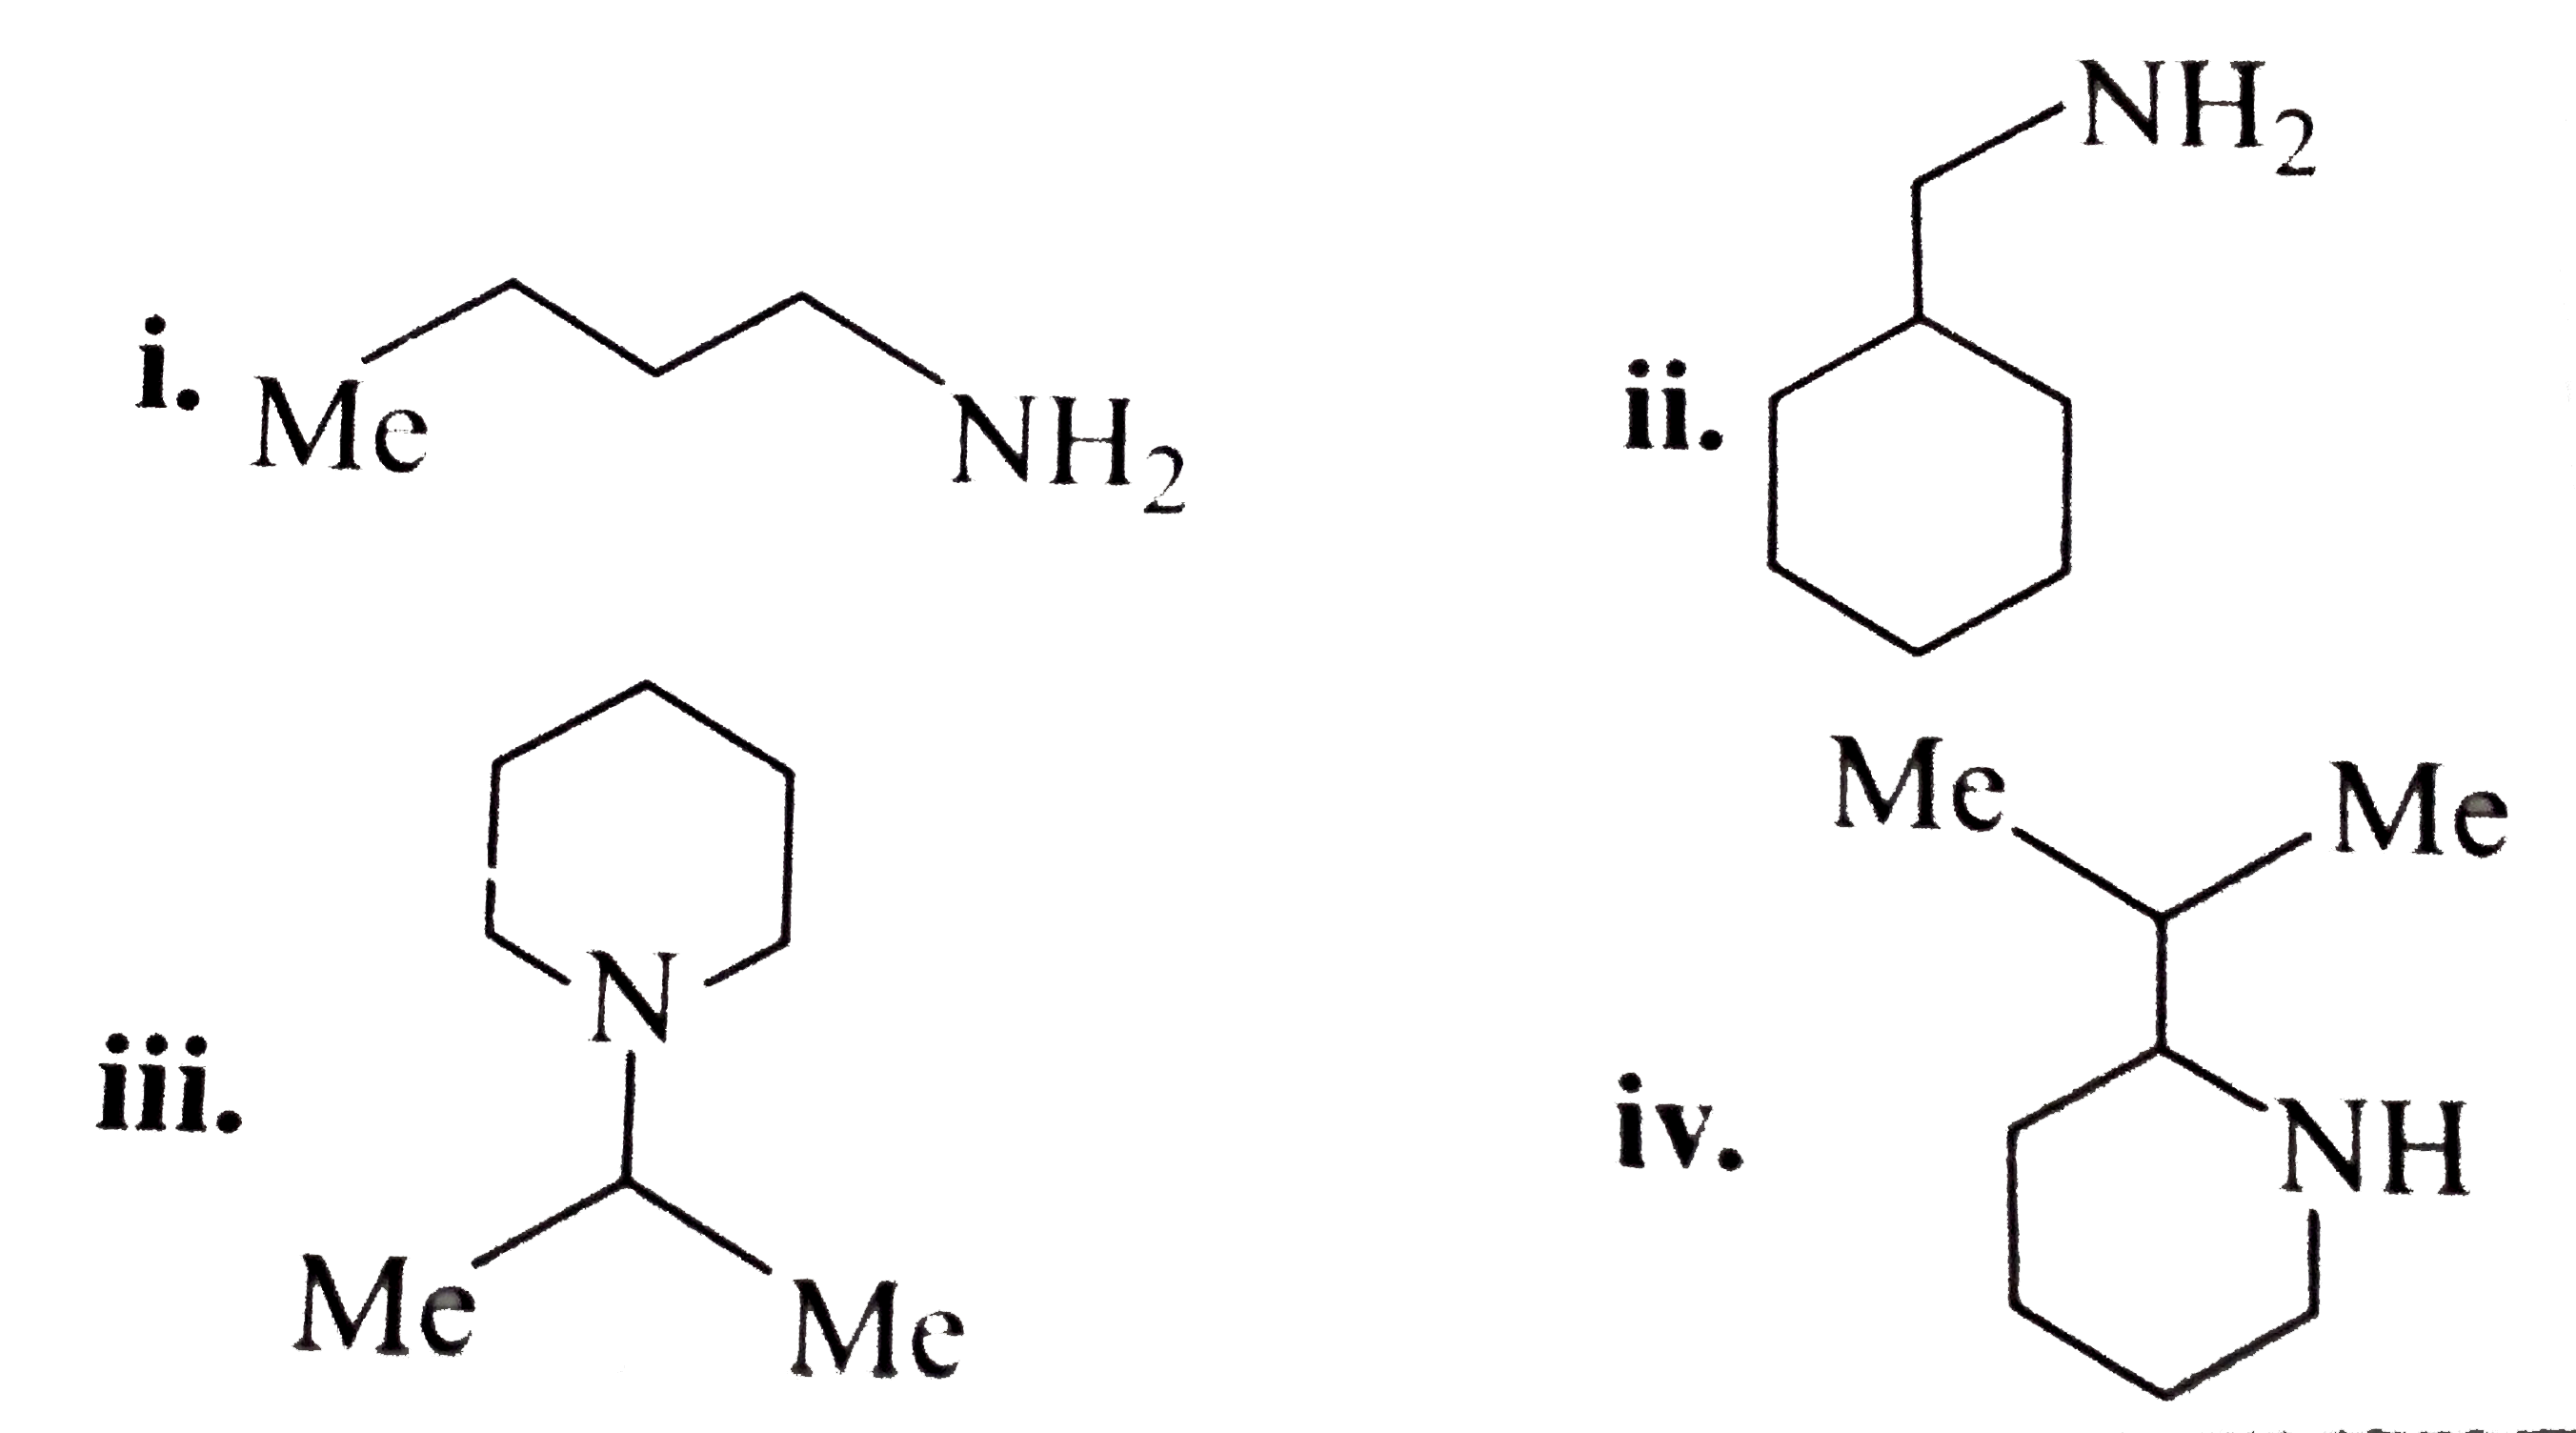 Give the reactants of the following amines obtained by reduction with  LAH.